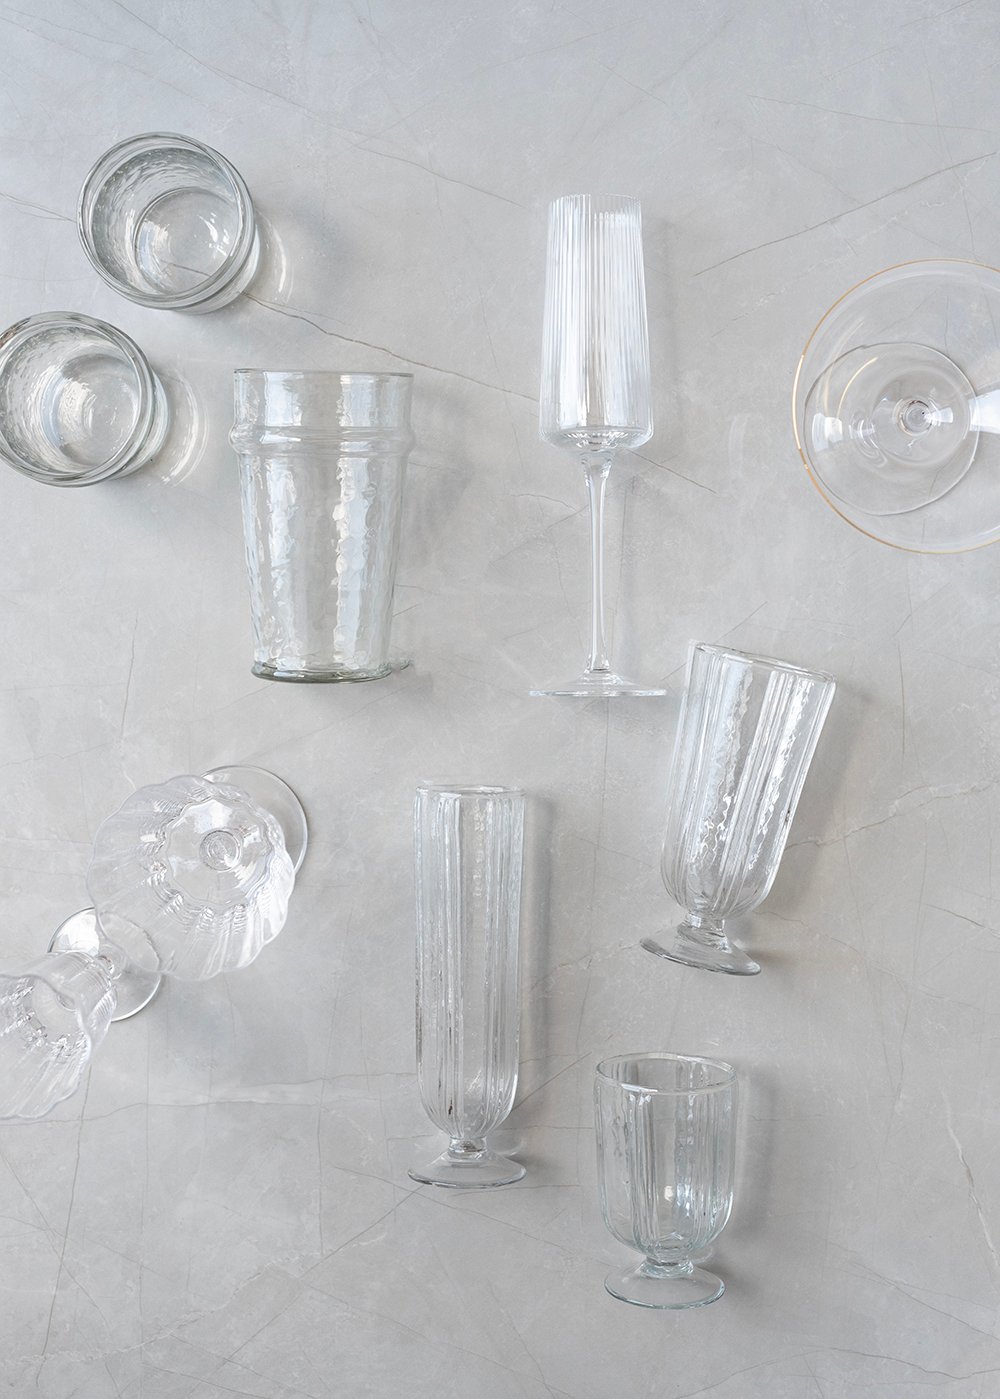 Classic Glassware from Tuesday Made - roomfortuesday.com